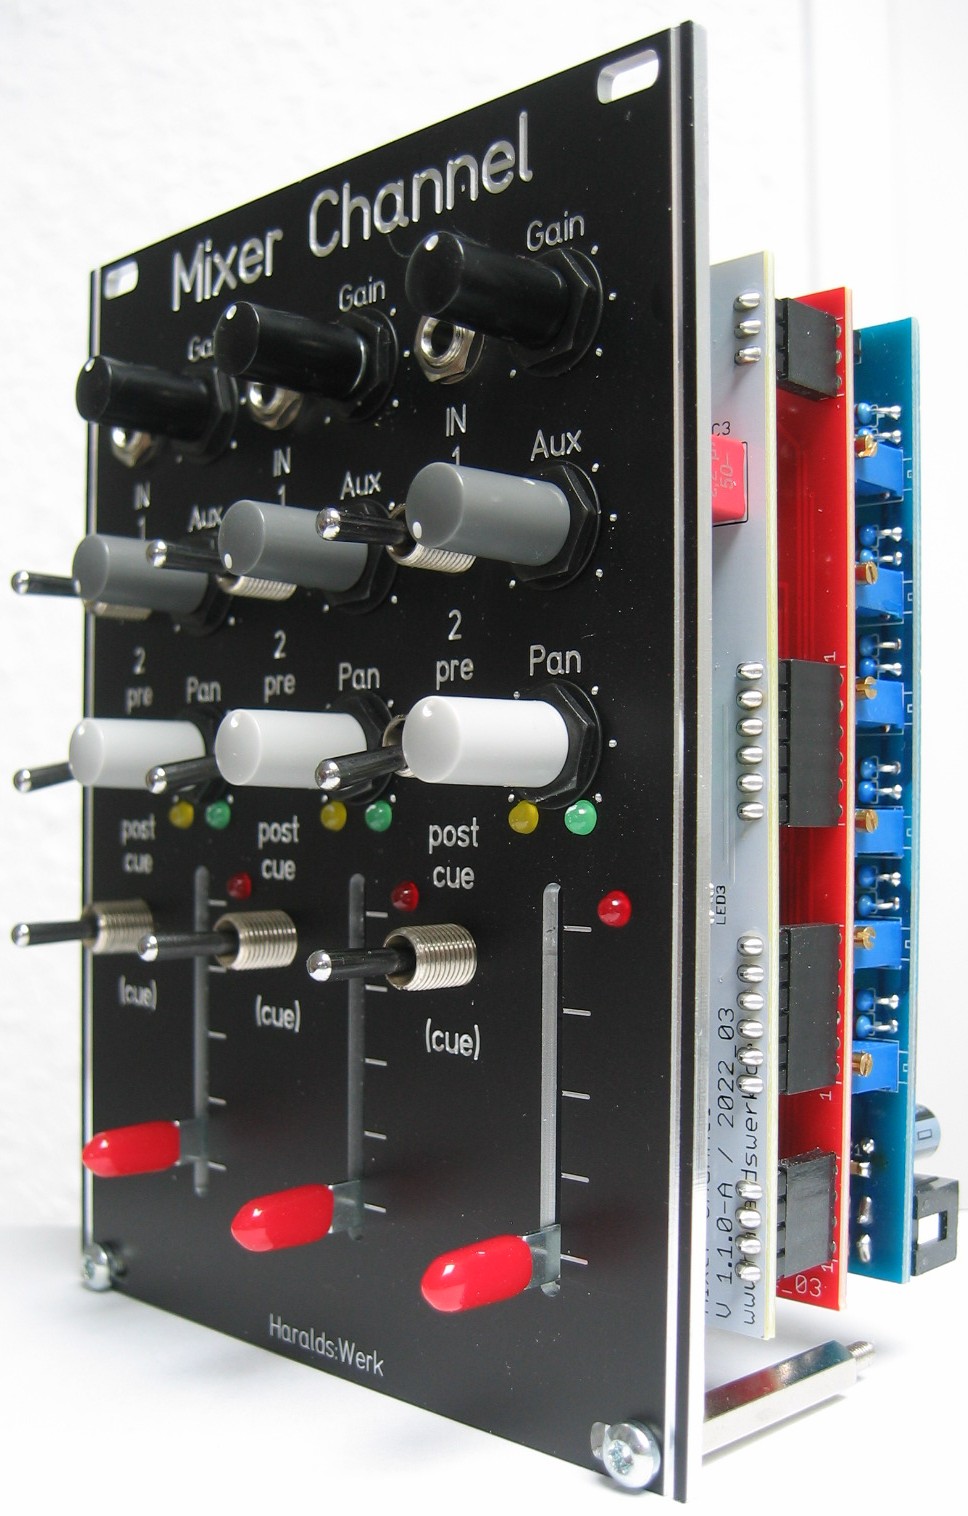 Performance Mixer Channel front half view